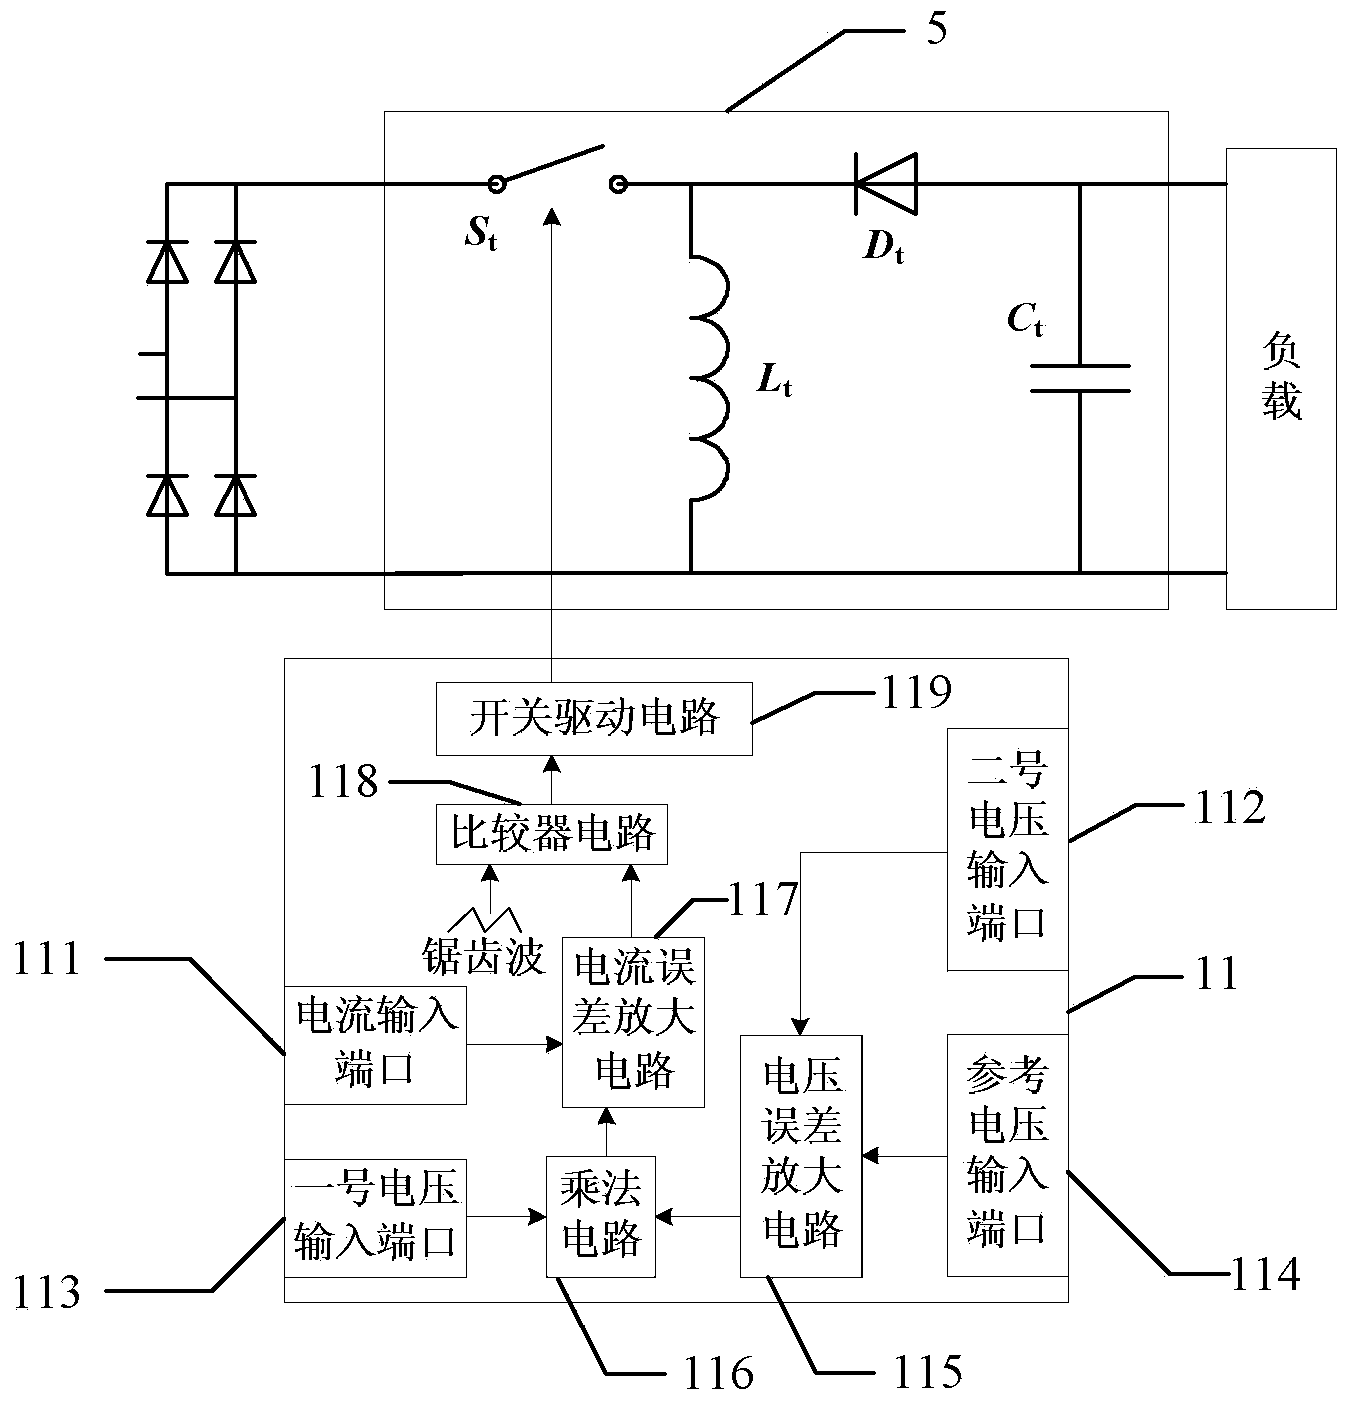 Resonance enhanced wireless power transmission structure with high resonance frequency stability